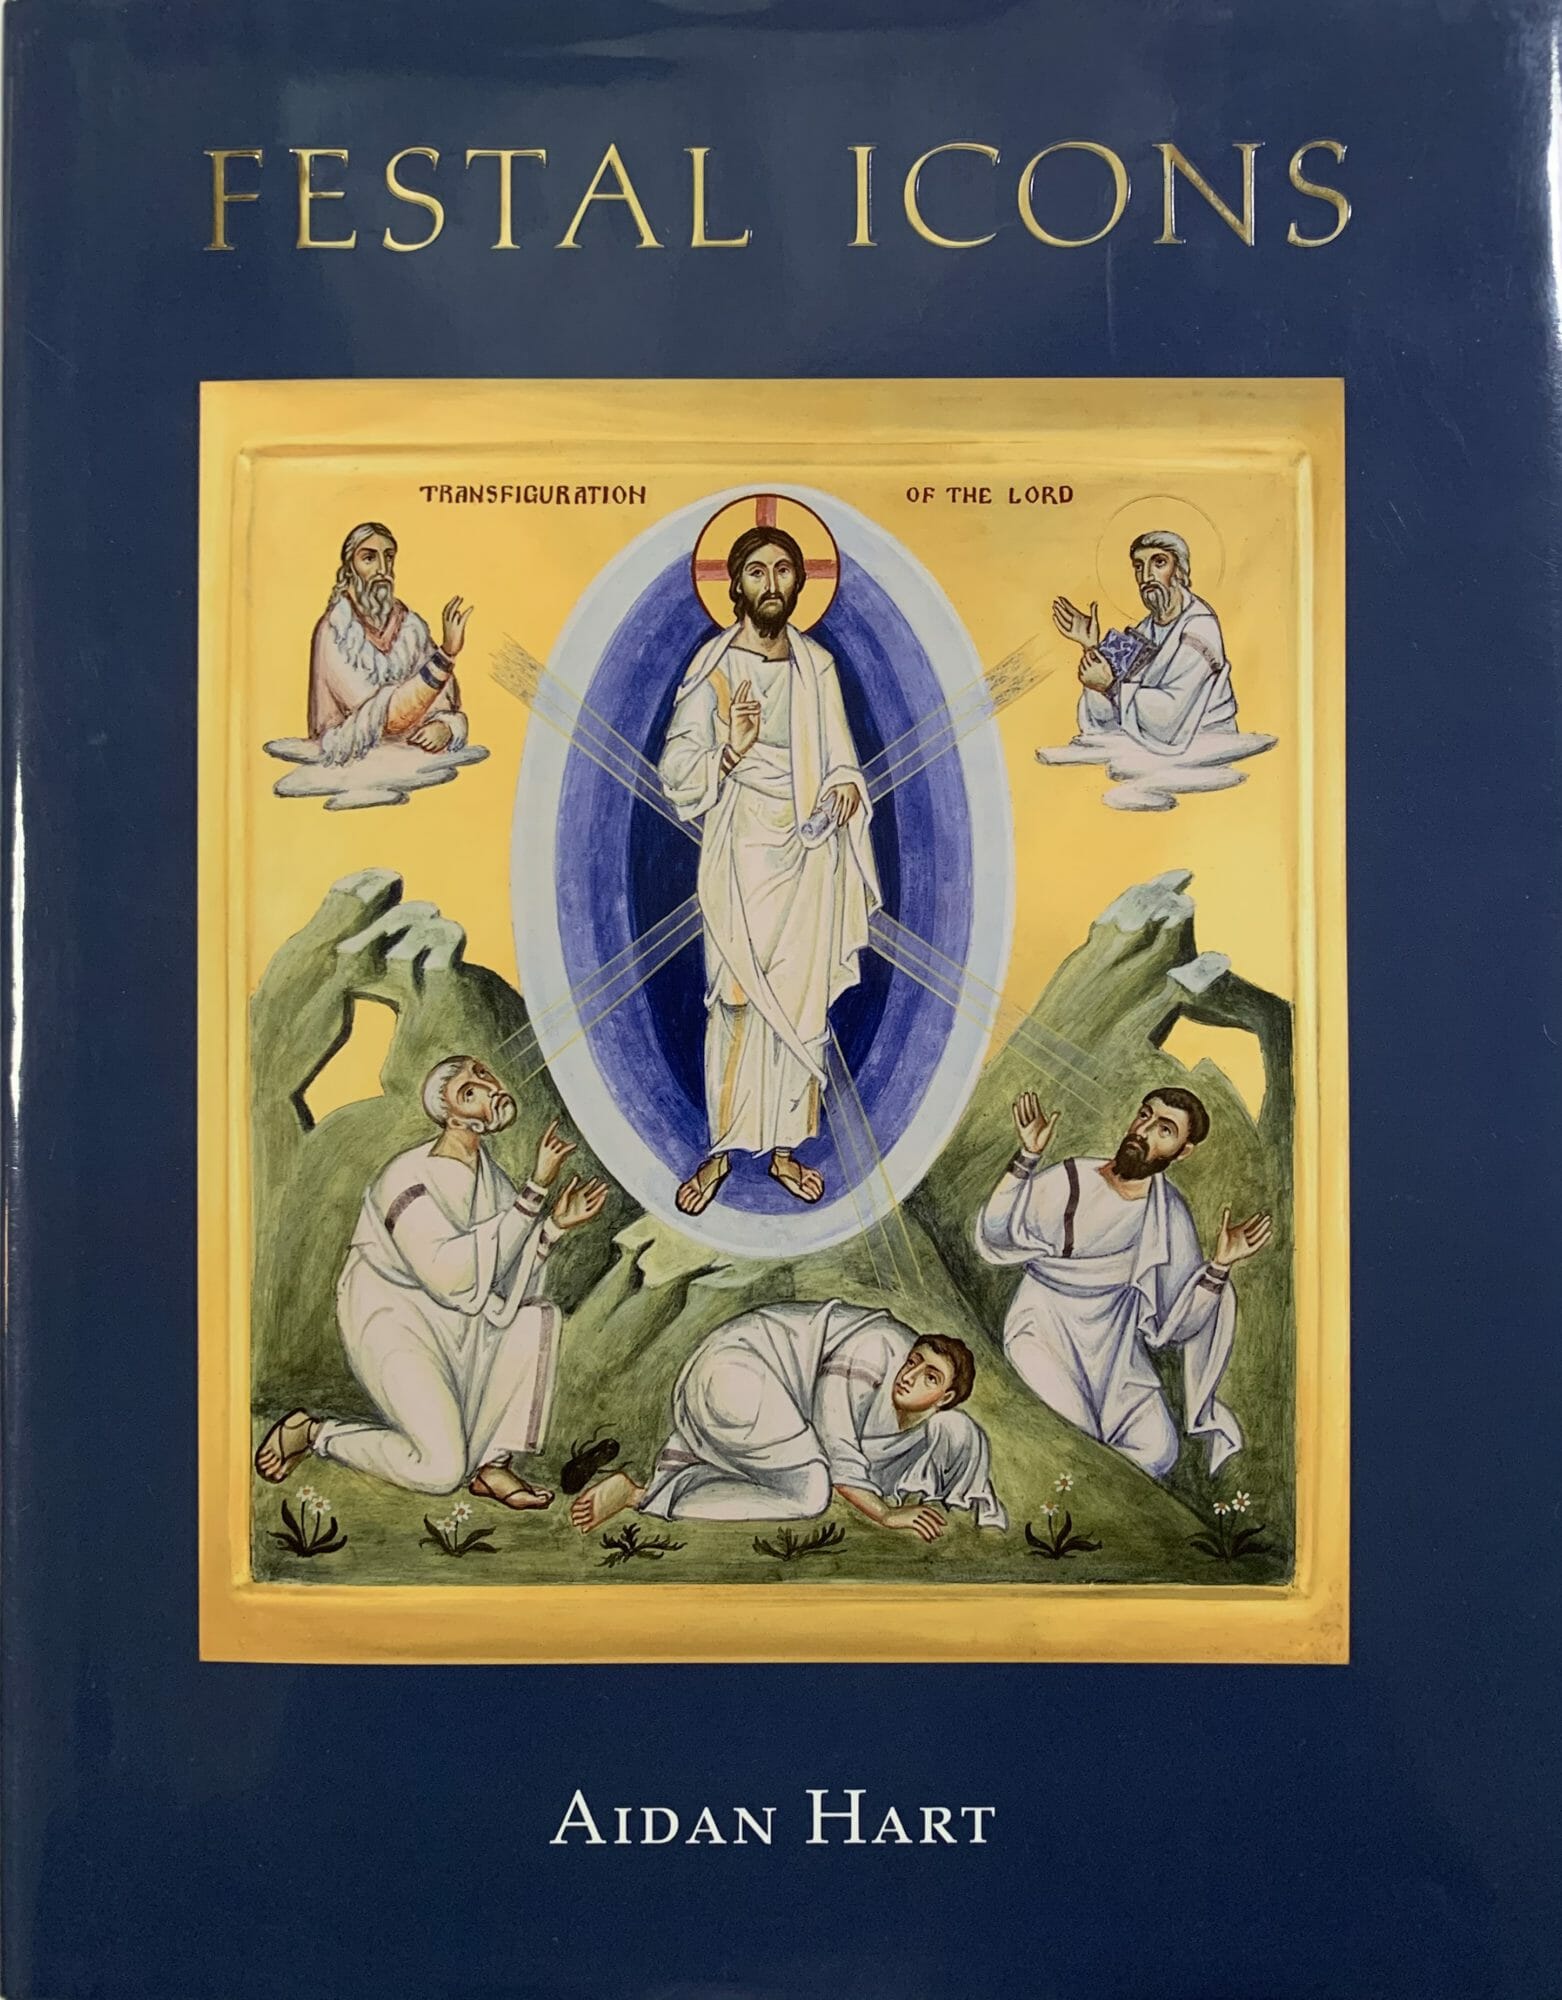 Review of “Festal Icons: History and Meaning” by Aidan Hart